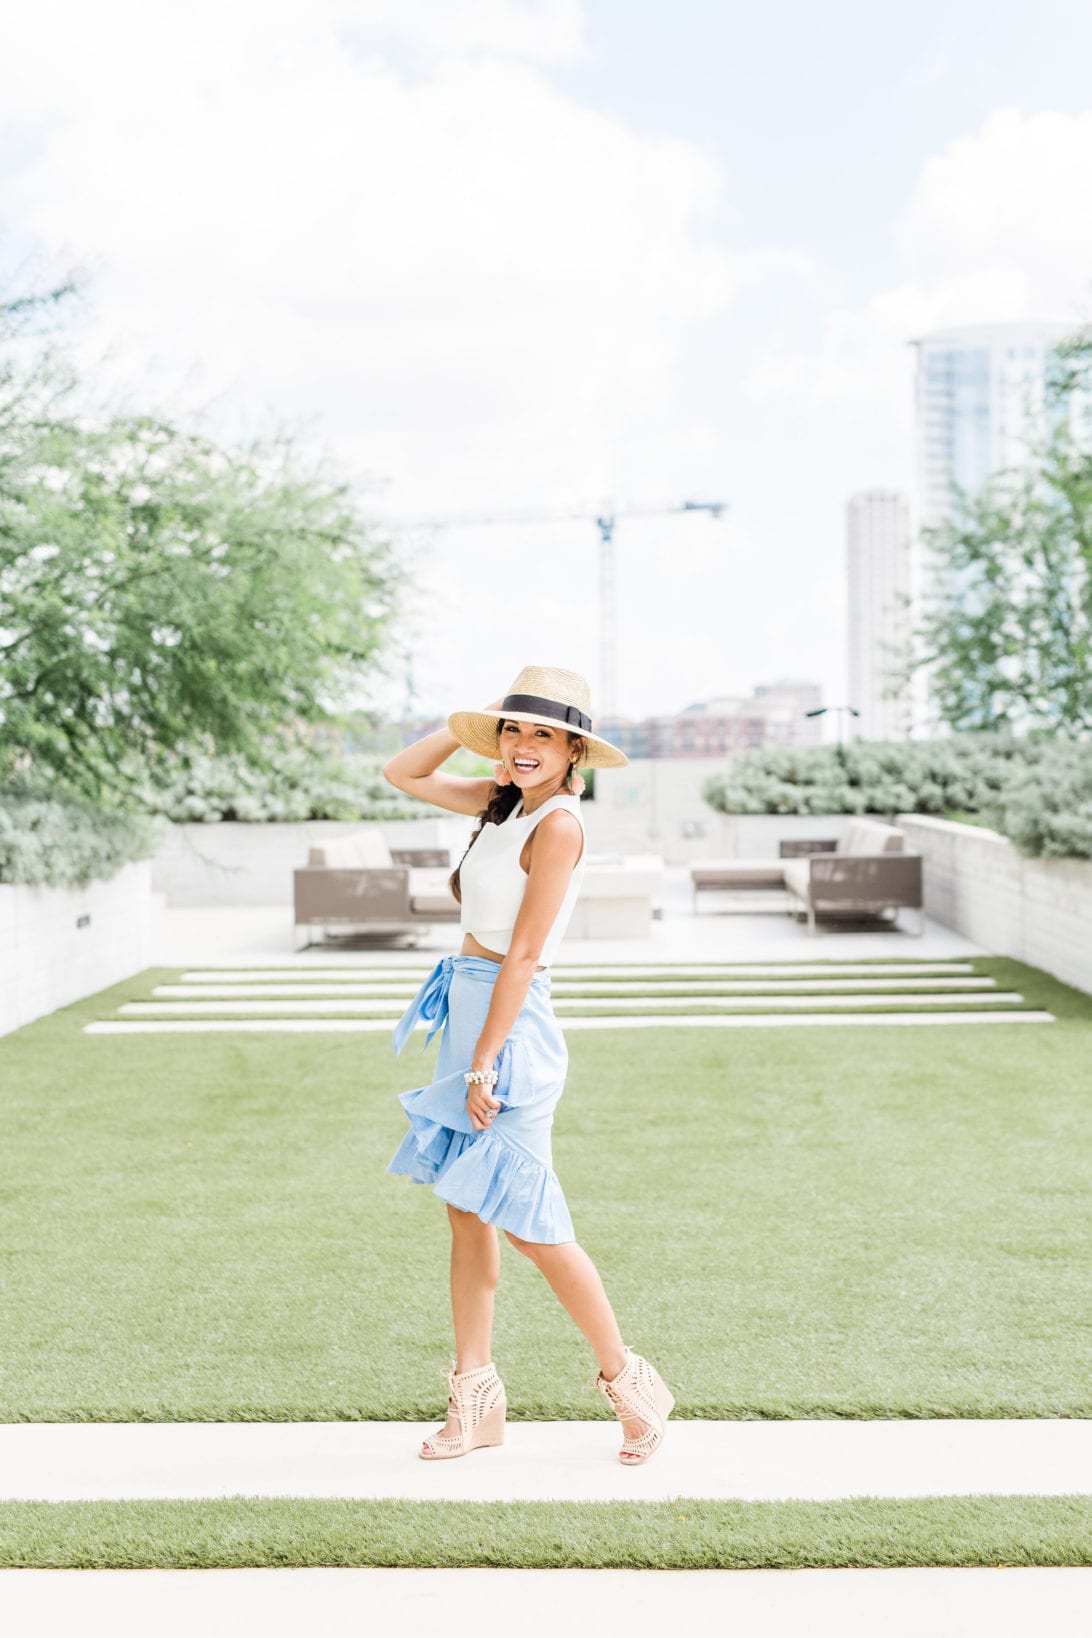 blue ruffle skirt, chic wish, straw hat, Jeffrey Campbell wedges, #dawnpdarnell, #summerstyle #houstonblogger, summer entertaining, summer party, soiree, how to throw a summer soiree